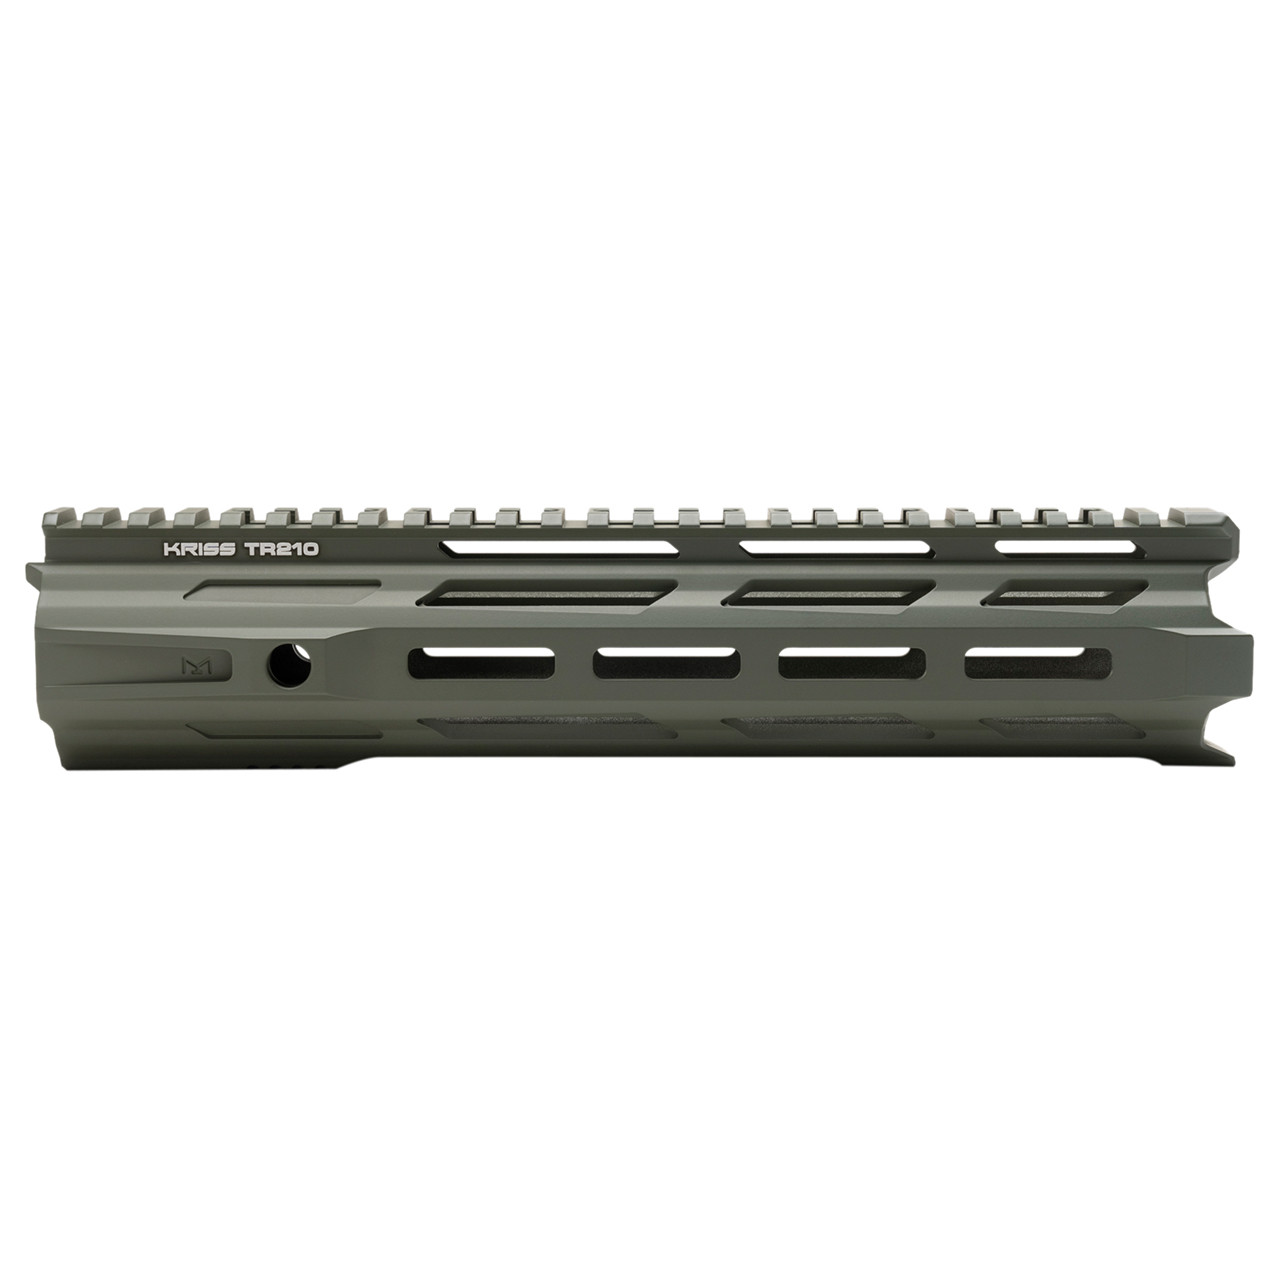 Shop Trident TR210 Rail Assembly / FG - $ 125 - Krytac.com | For Airsoft Use Only.